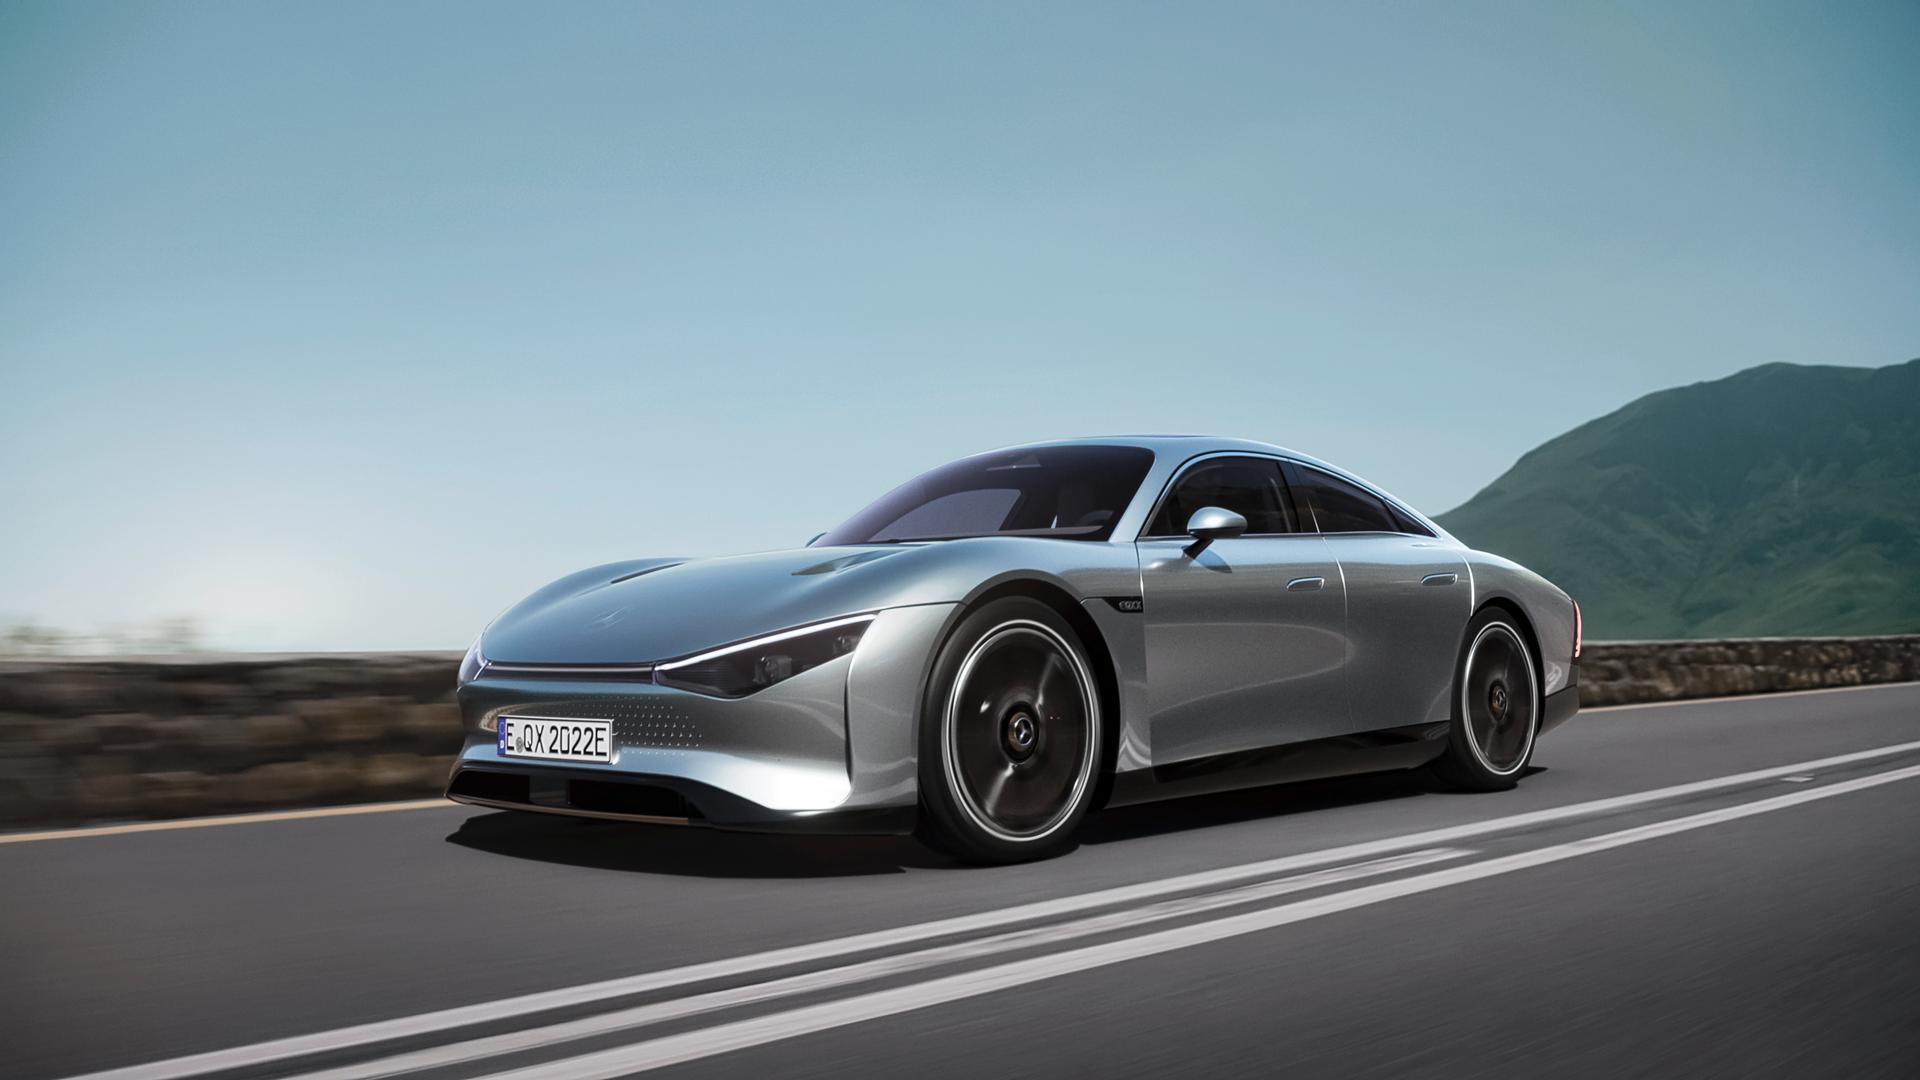 1000km+ Range on a Single Charge: Mercedes-Benz Vision EQXX